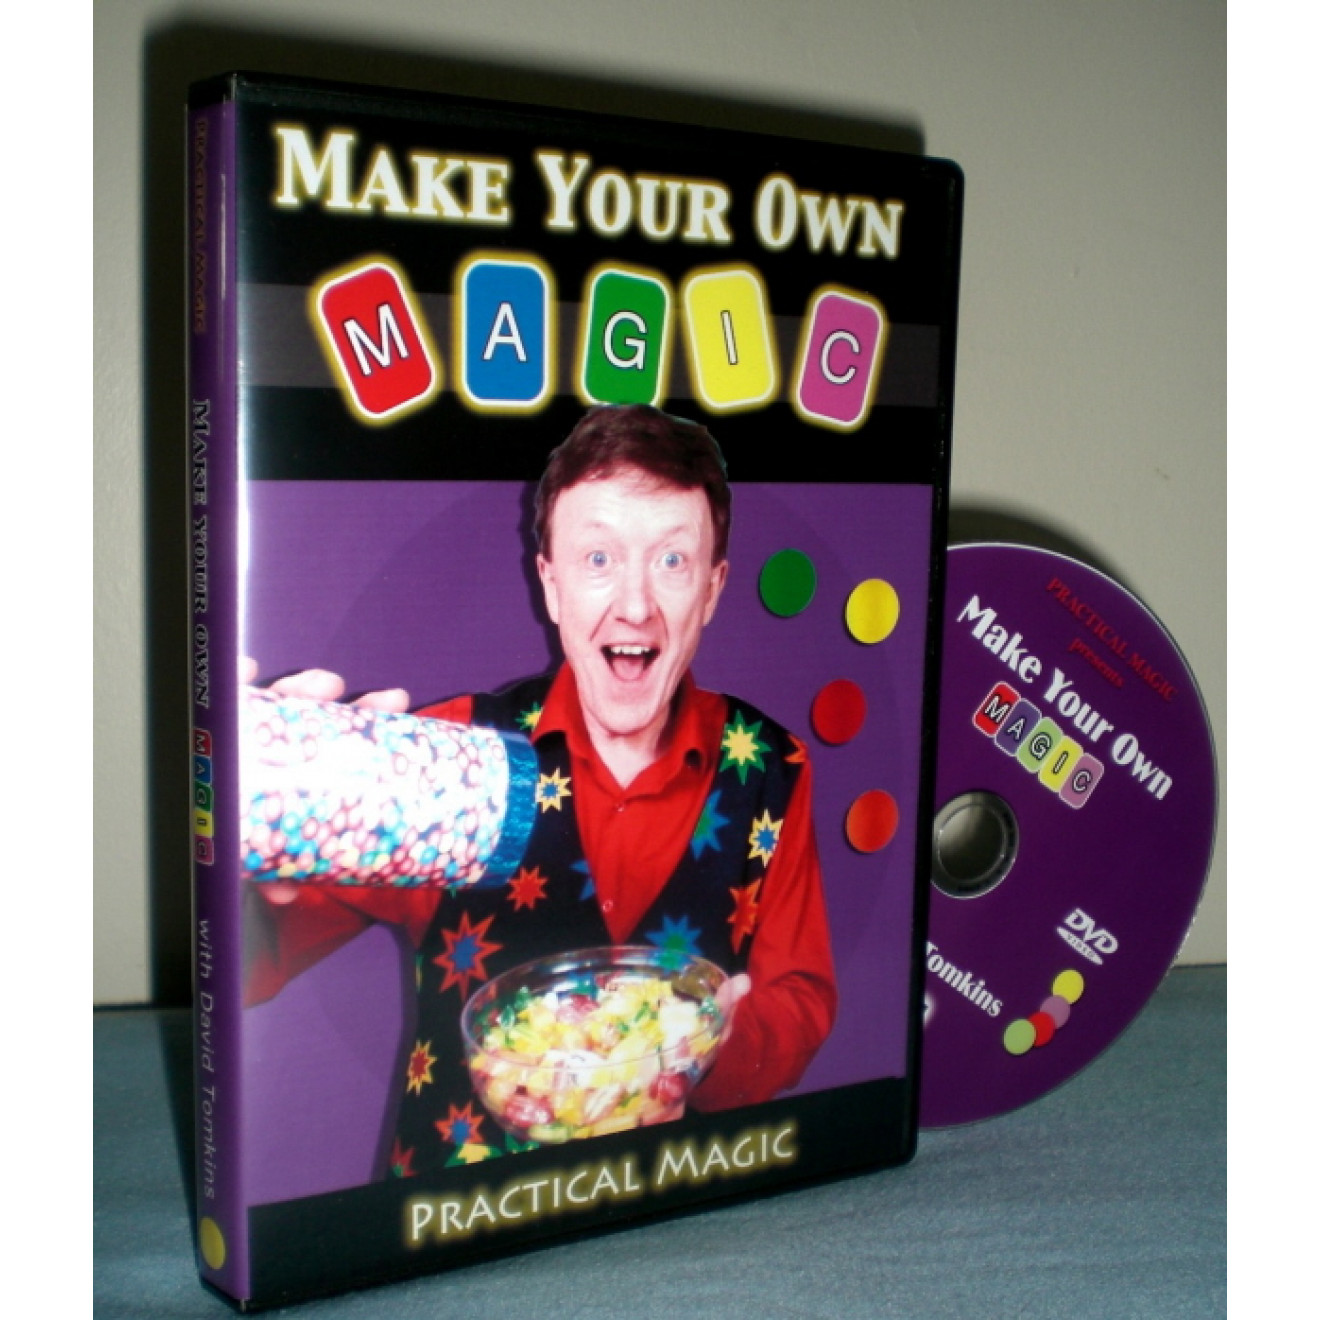 Make your own Magic